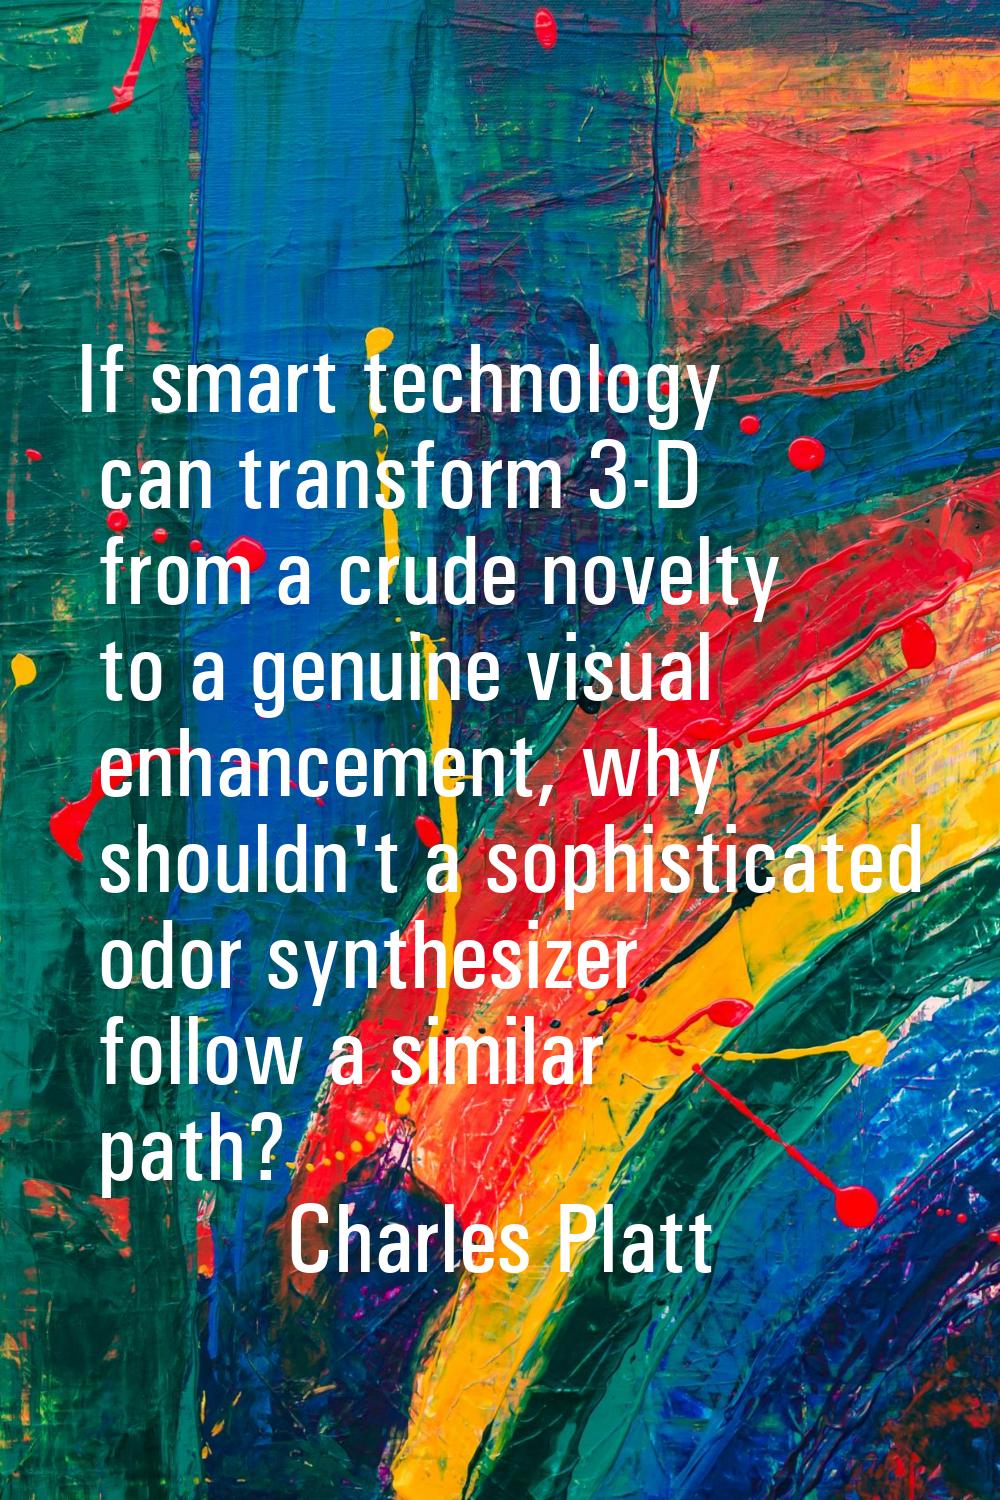 If smart technology can transform 3-D from a crude novelty to a genuine visual enhancement, why sho